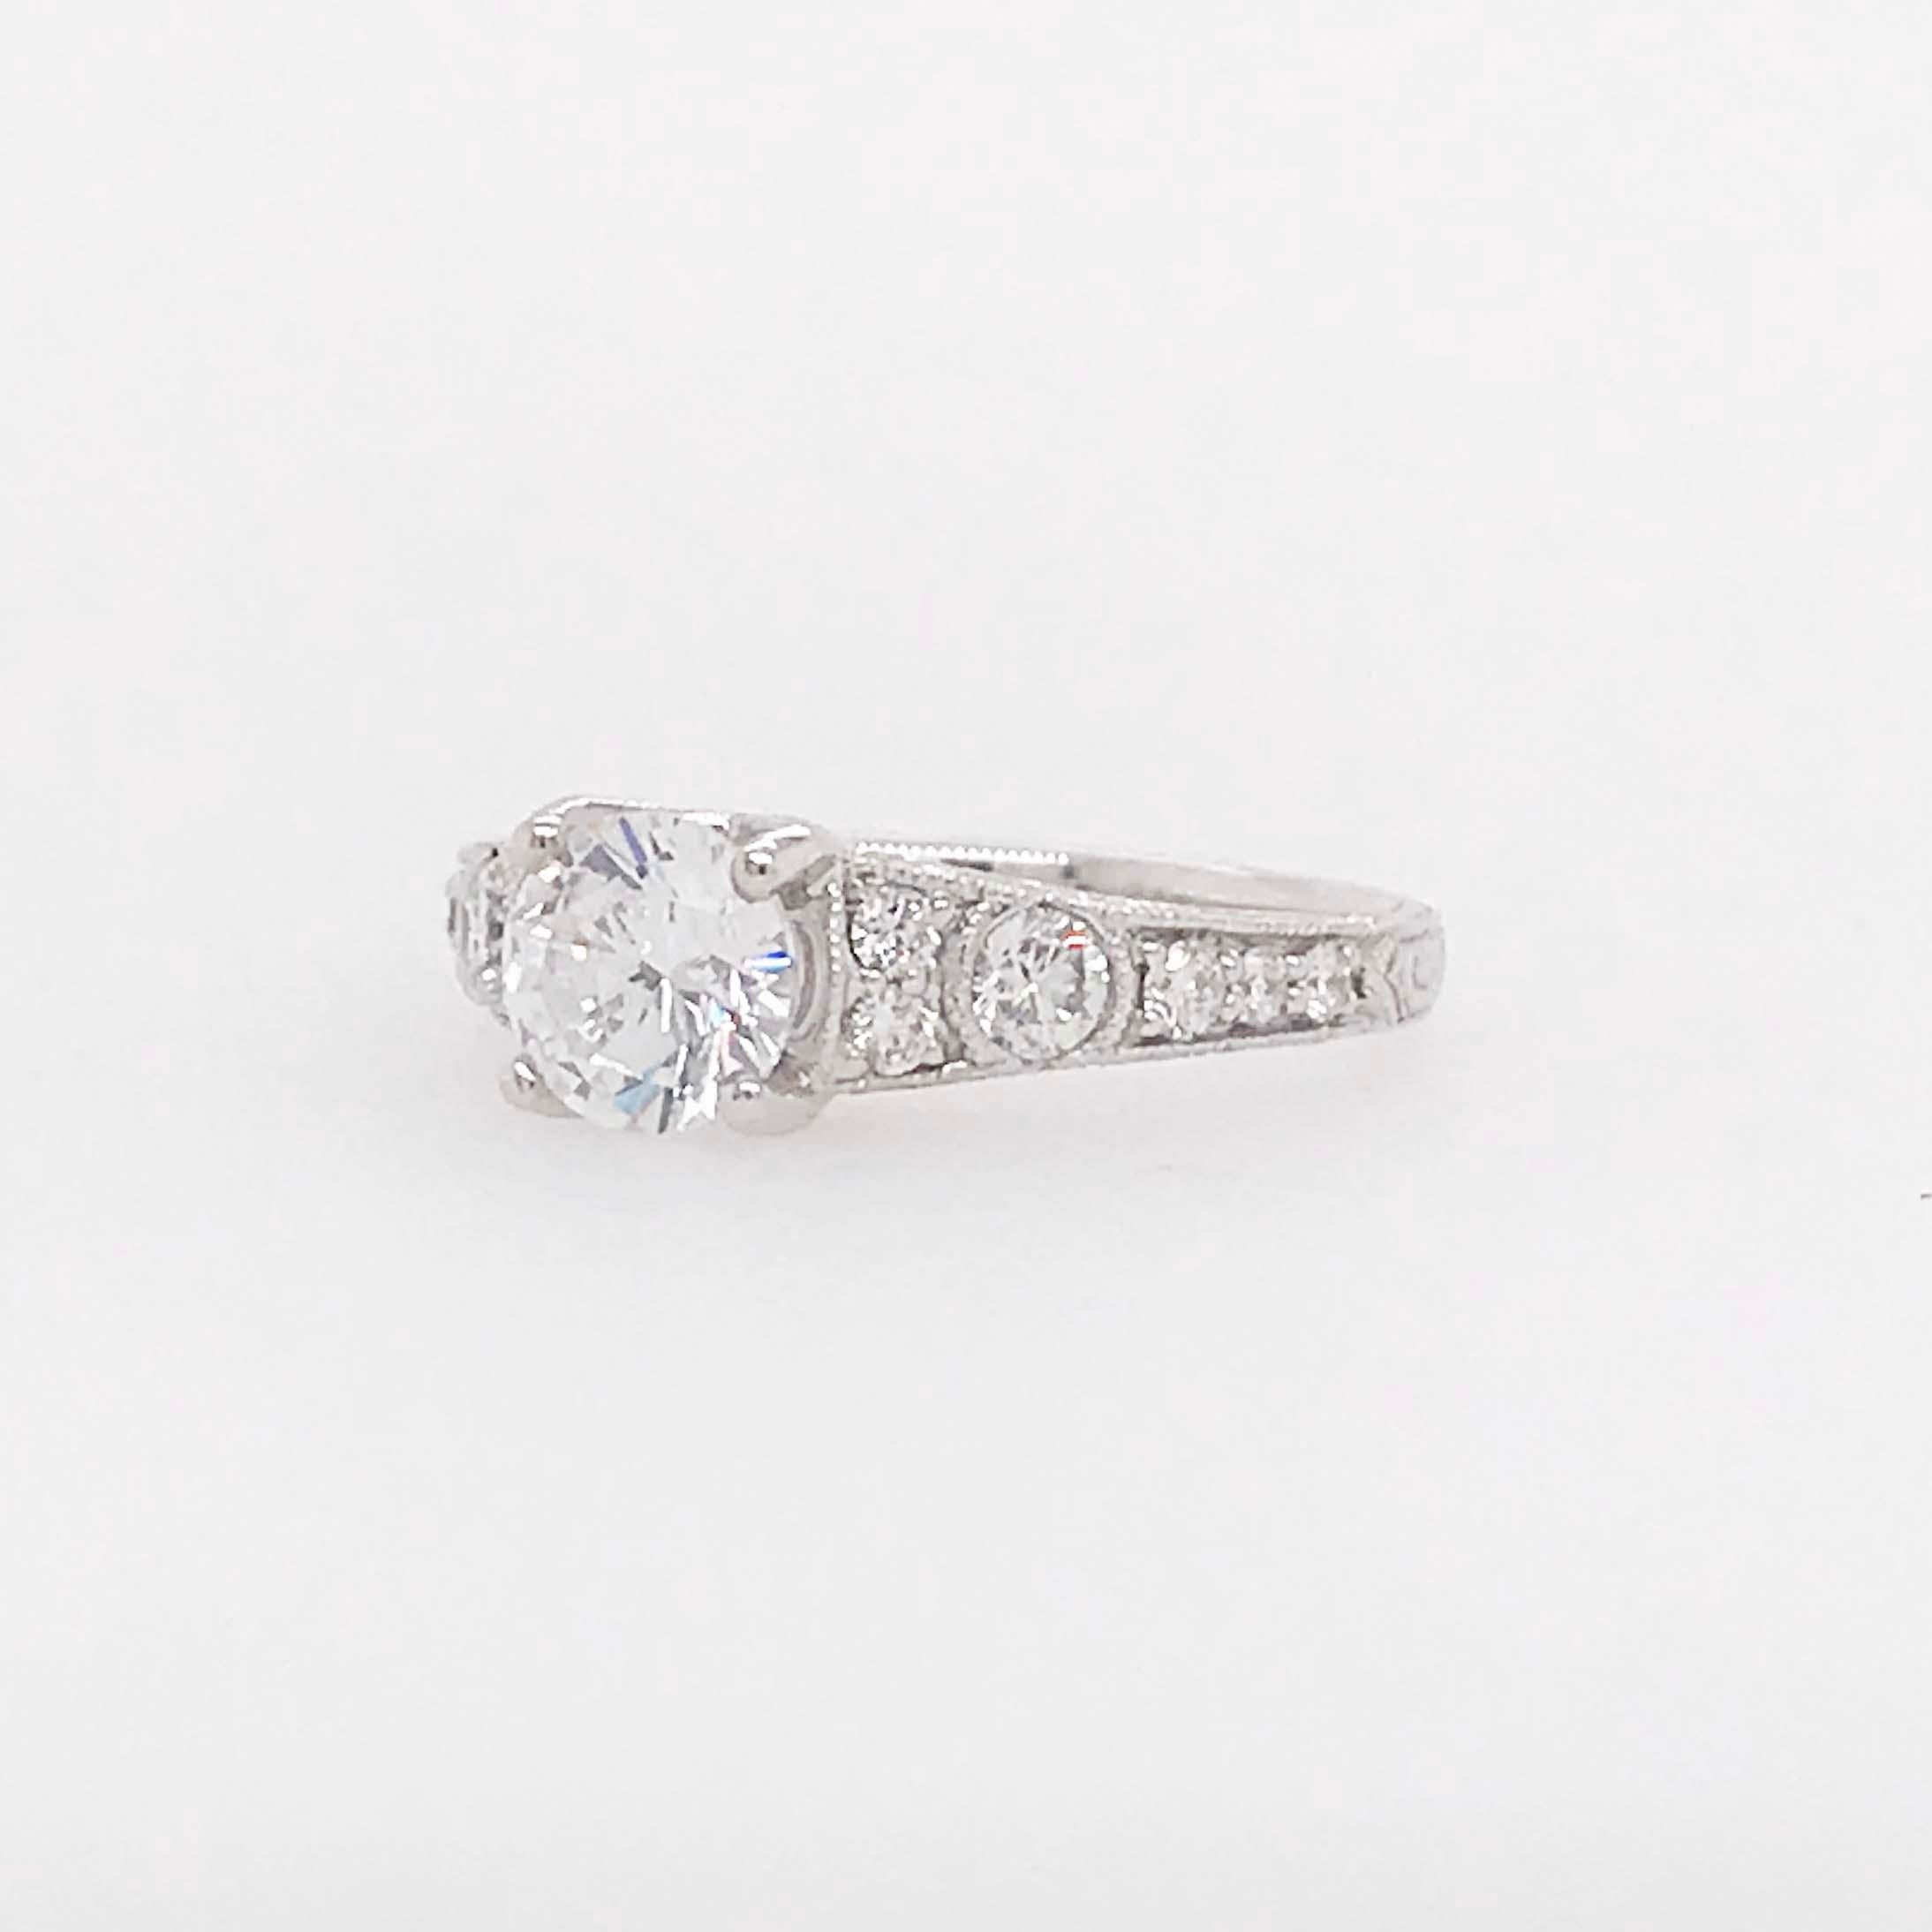 Certified 1 Carat Diamond Vintage Style Ring and Antique Hand Engraving For Sale 1